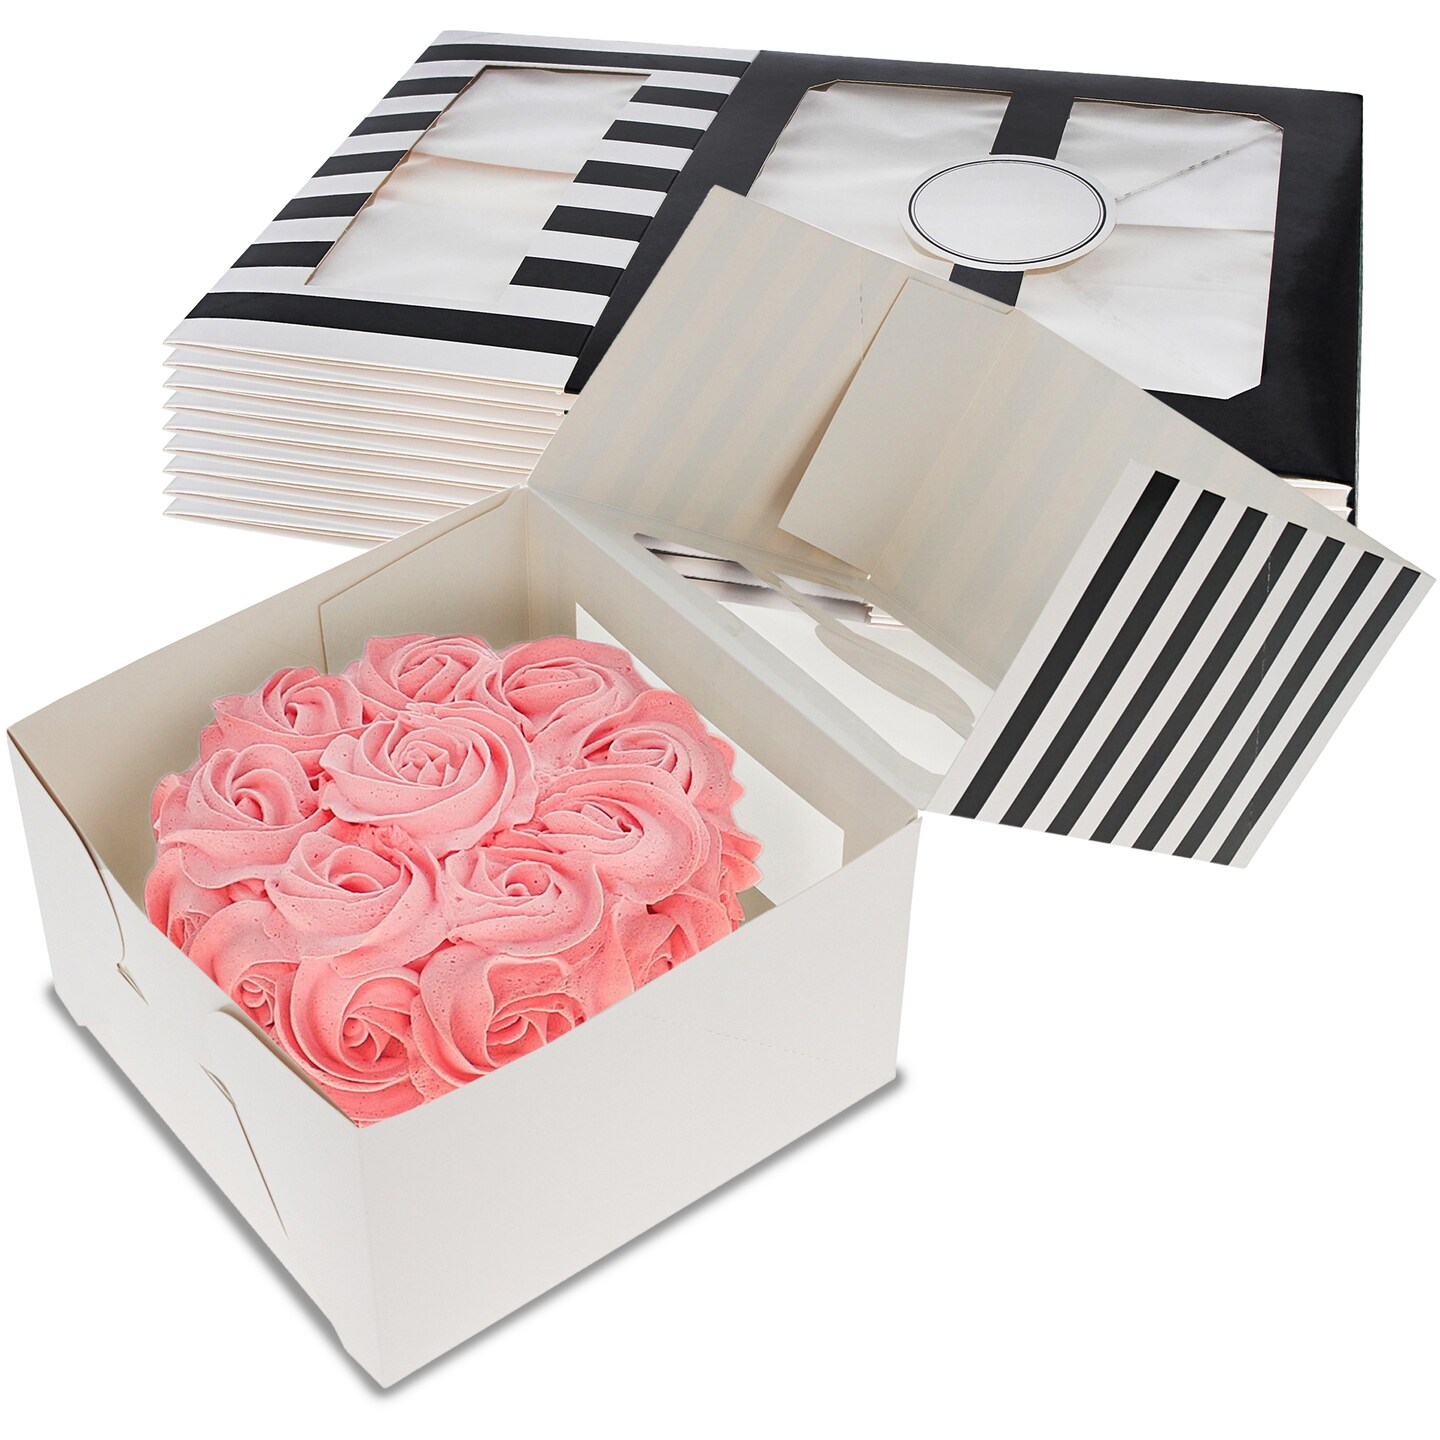 Spec101 Cake Box 10pk - Striped Black or Pink Cake Boxes for Bakery Pastries